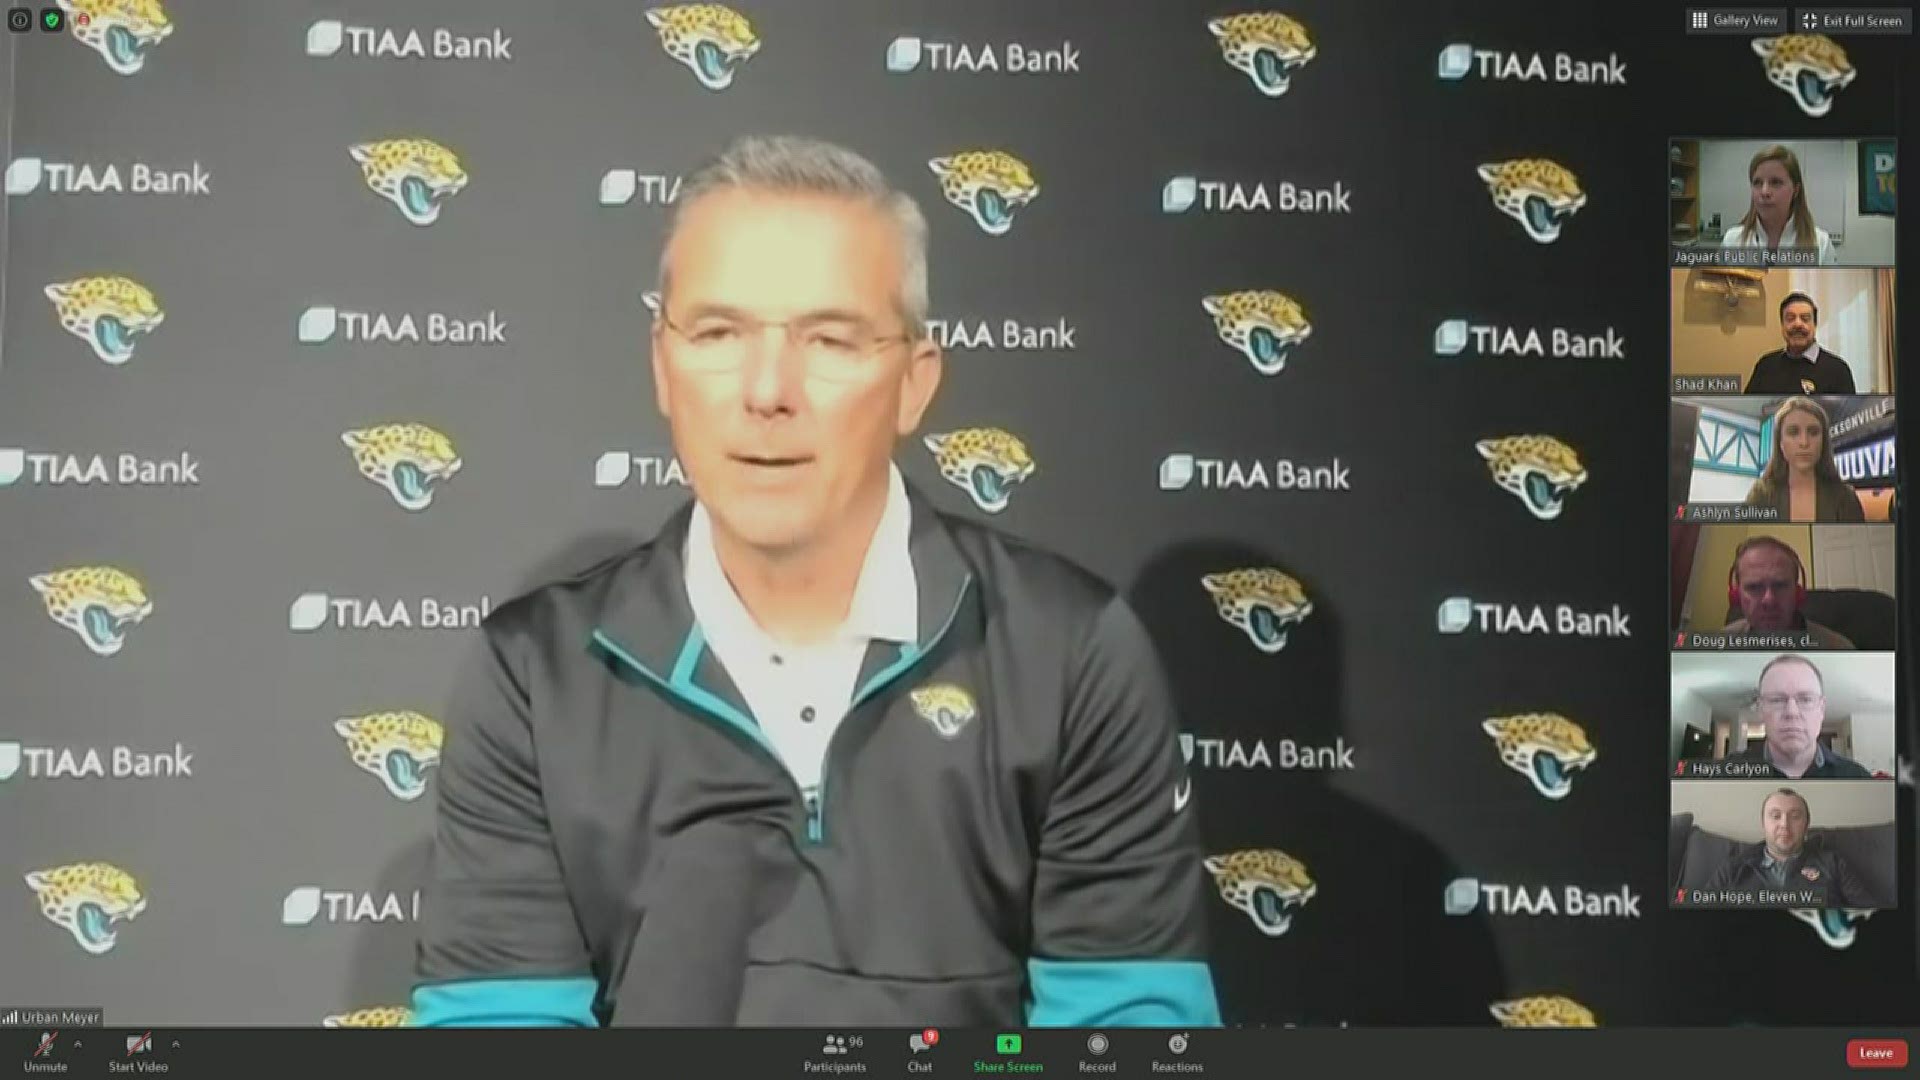 Thursday evening the Jacksonville Jaguars hired Urban Meyer as the 6th head coach in franchise history. He addressed the media Friday from TIAA Bank Field.